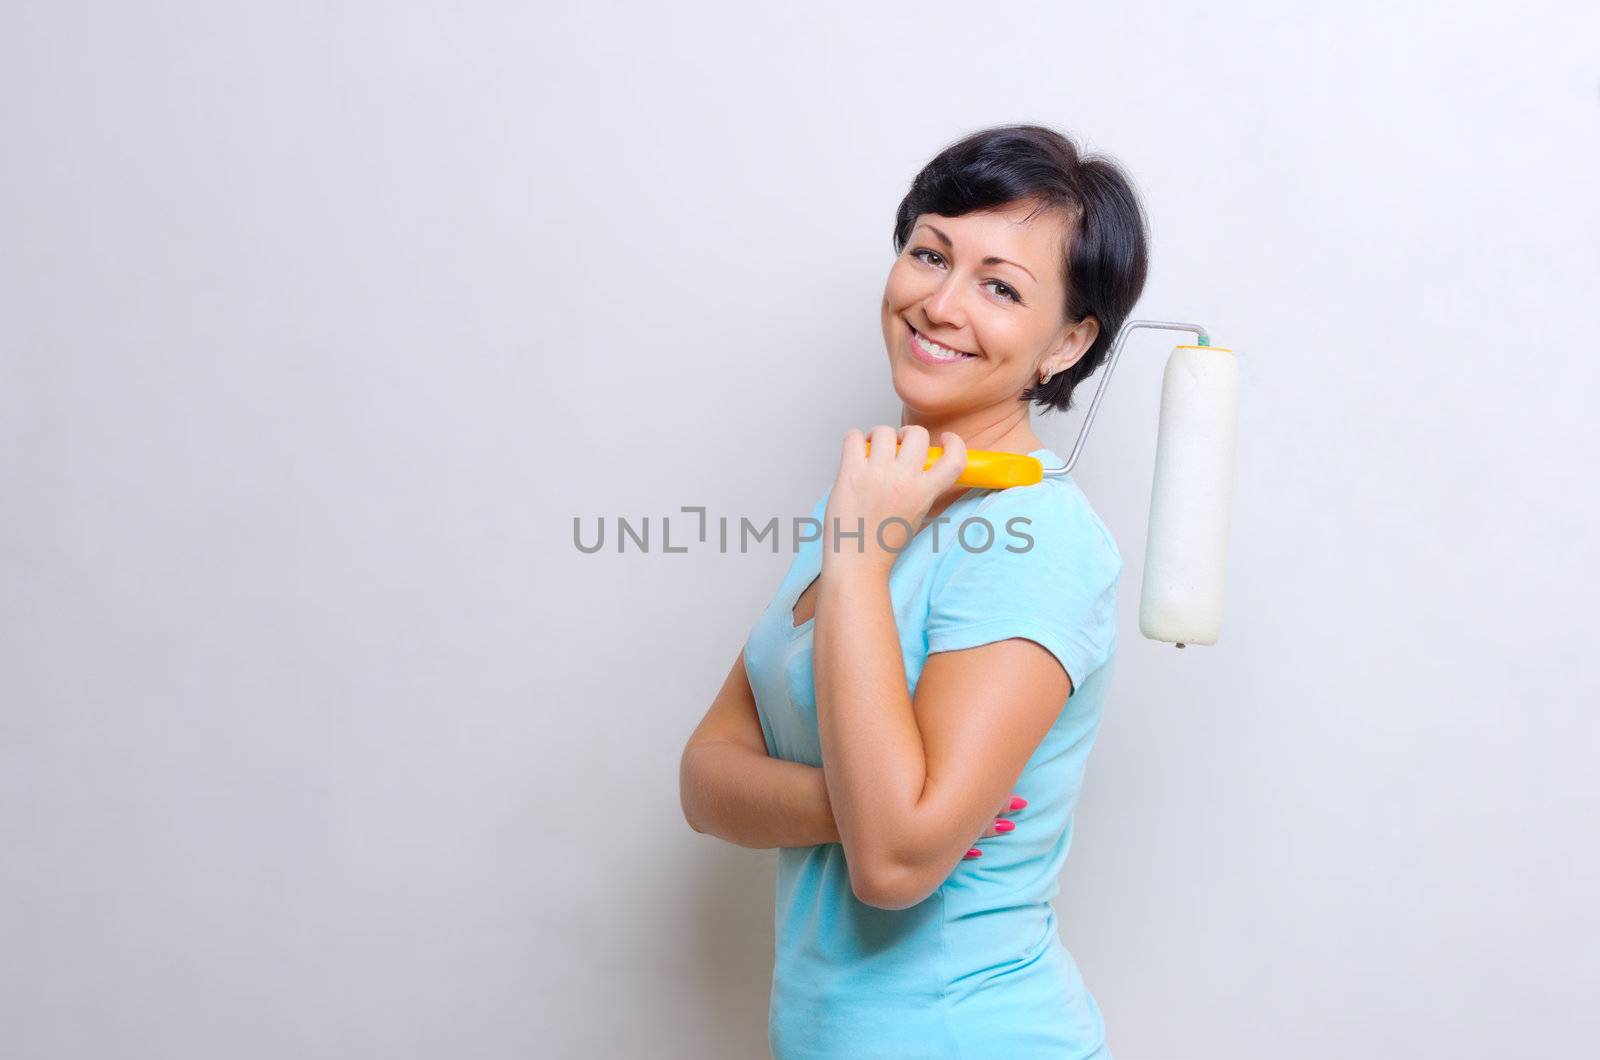 Young smiling woman with painting roller